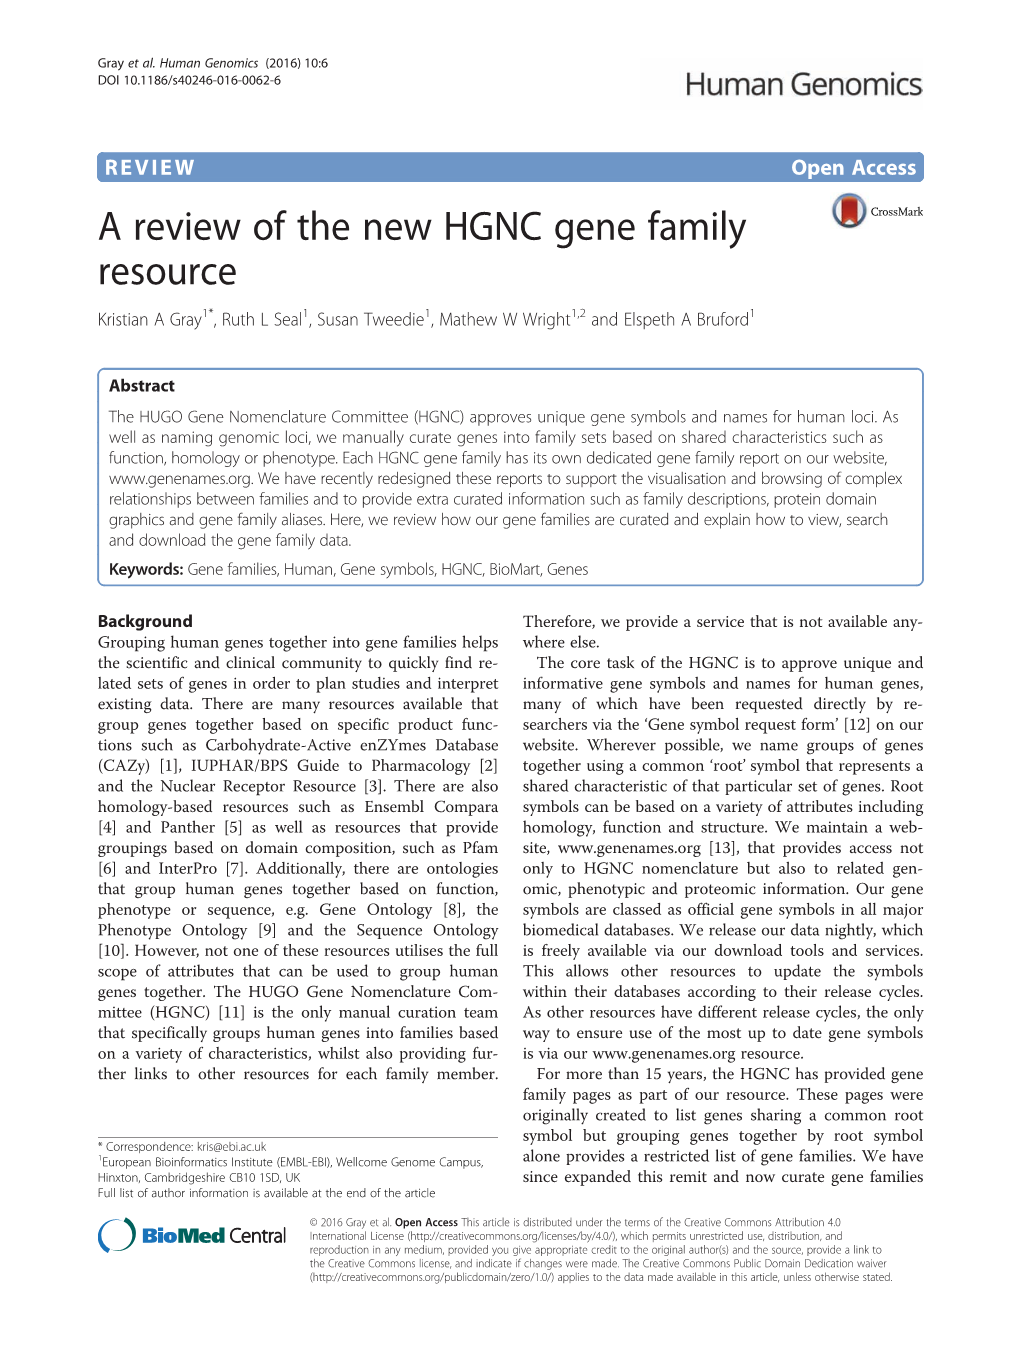 A Review of the New HGNC Gene Family Resource Kristian a Gray1*, Ruth L Seal1, Susan Tweedie1, Mathew W Wright1,2 and Elspeth a Bruford1